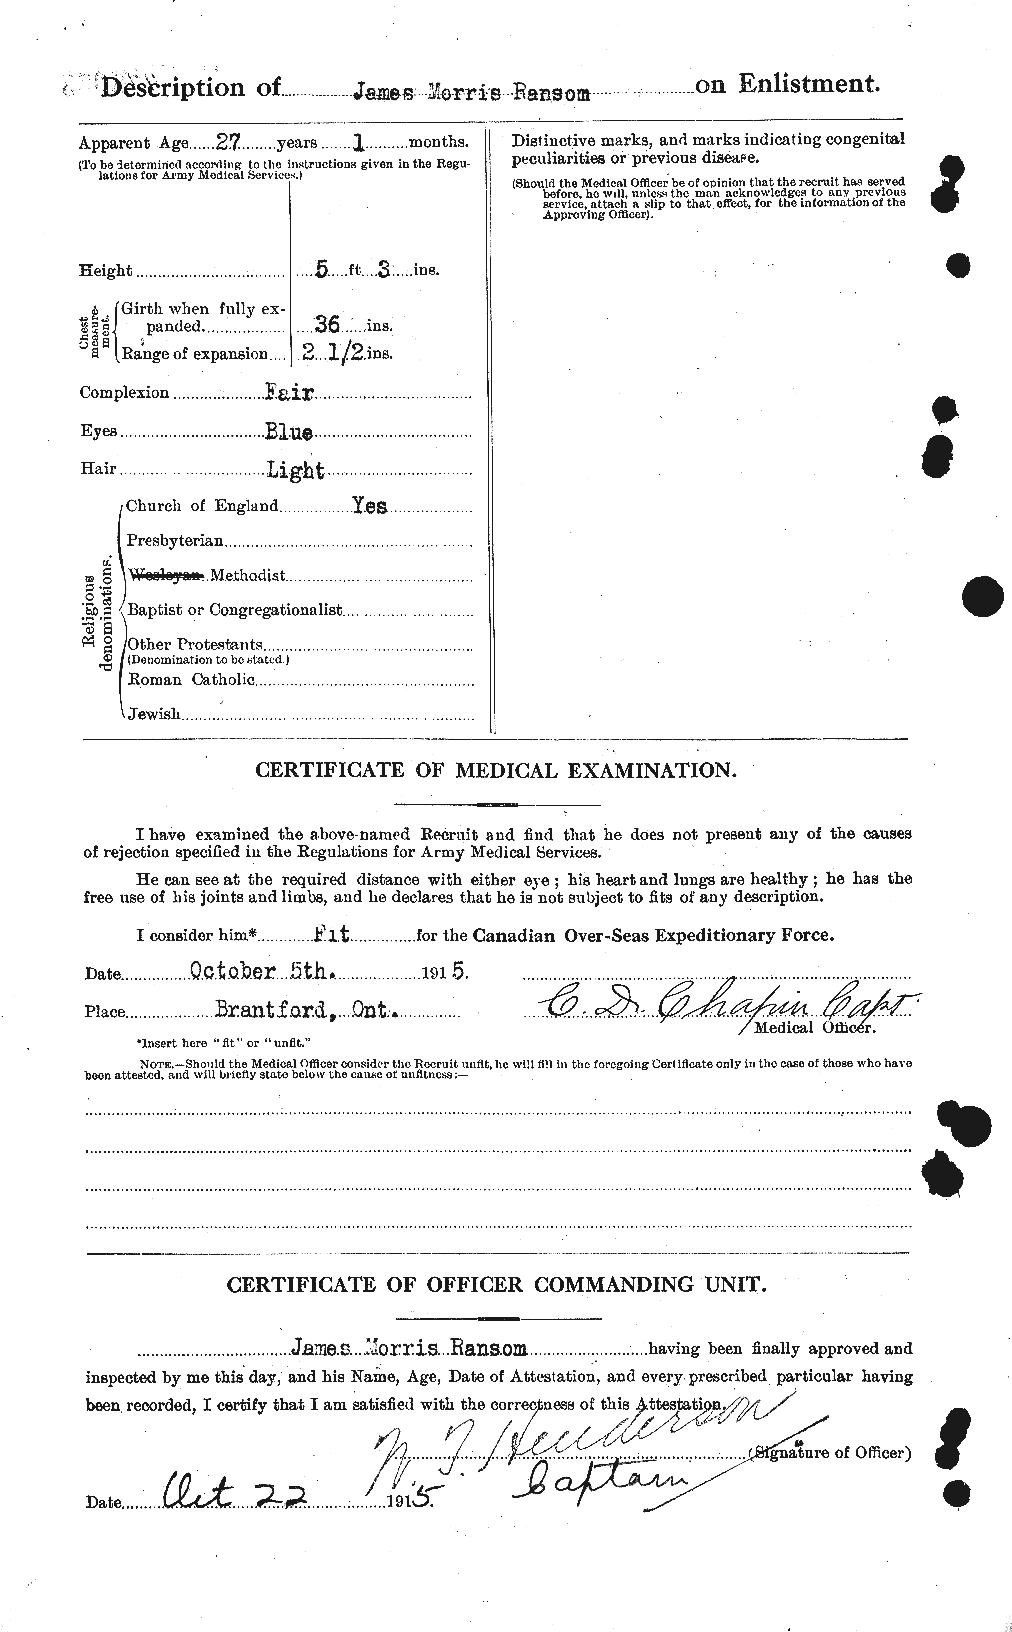 Personnel Records of the First World War - CEF 594886b